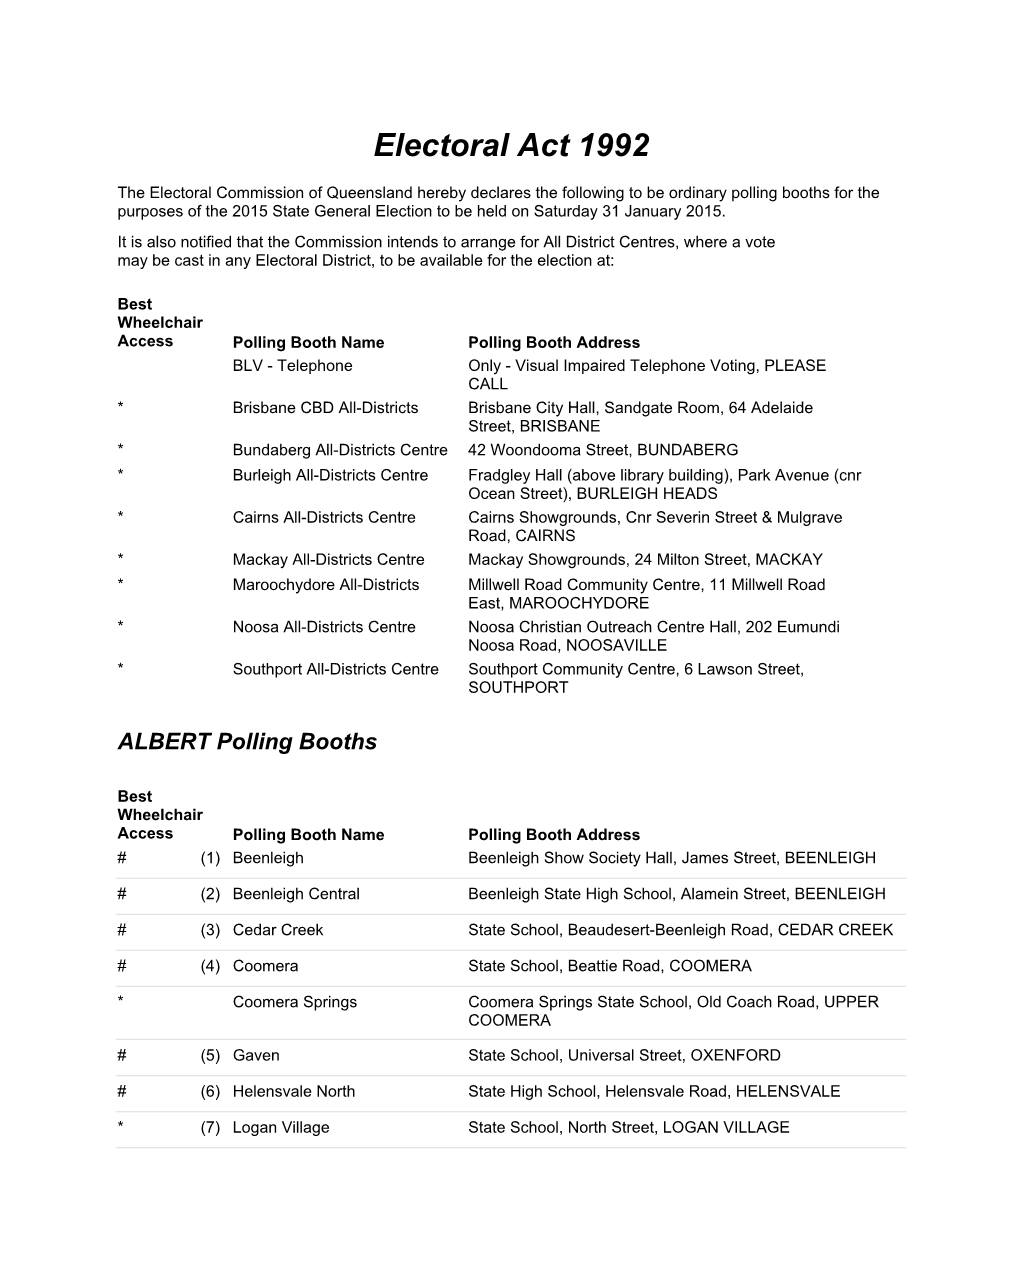 Polling Booths for the Purposes of the 2015 State General Election to Be Held on Saturday 31 January 2015